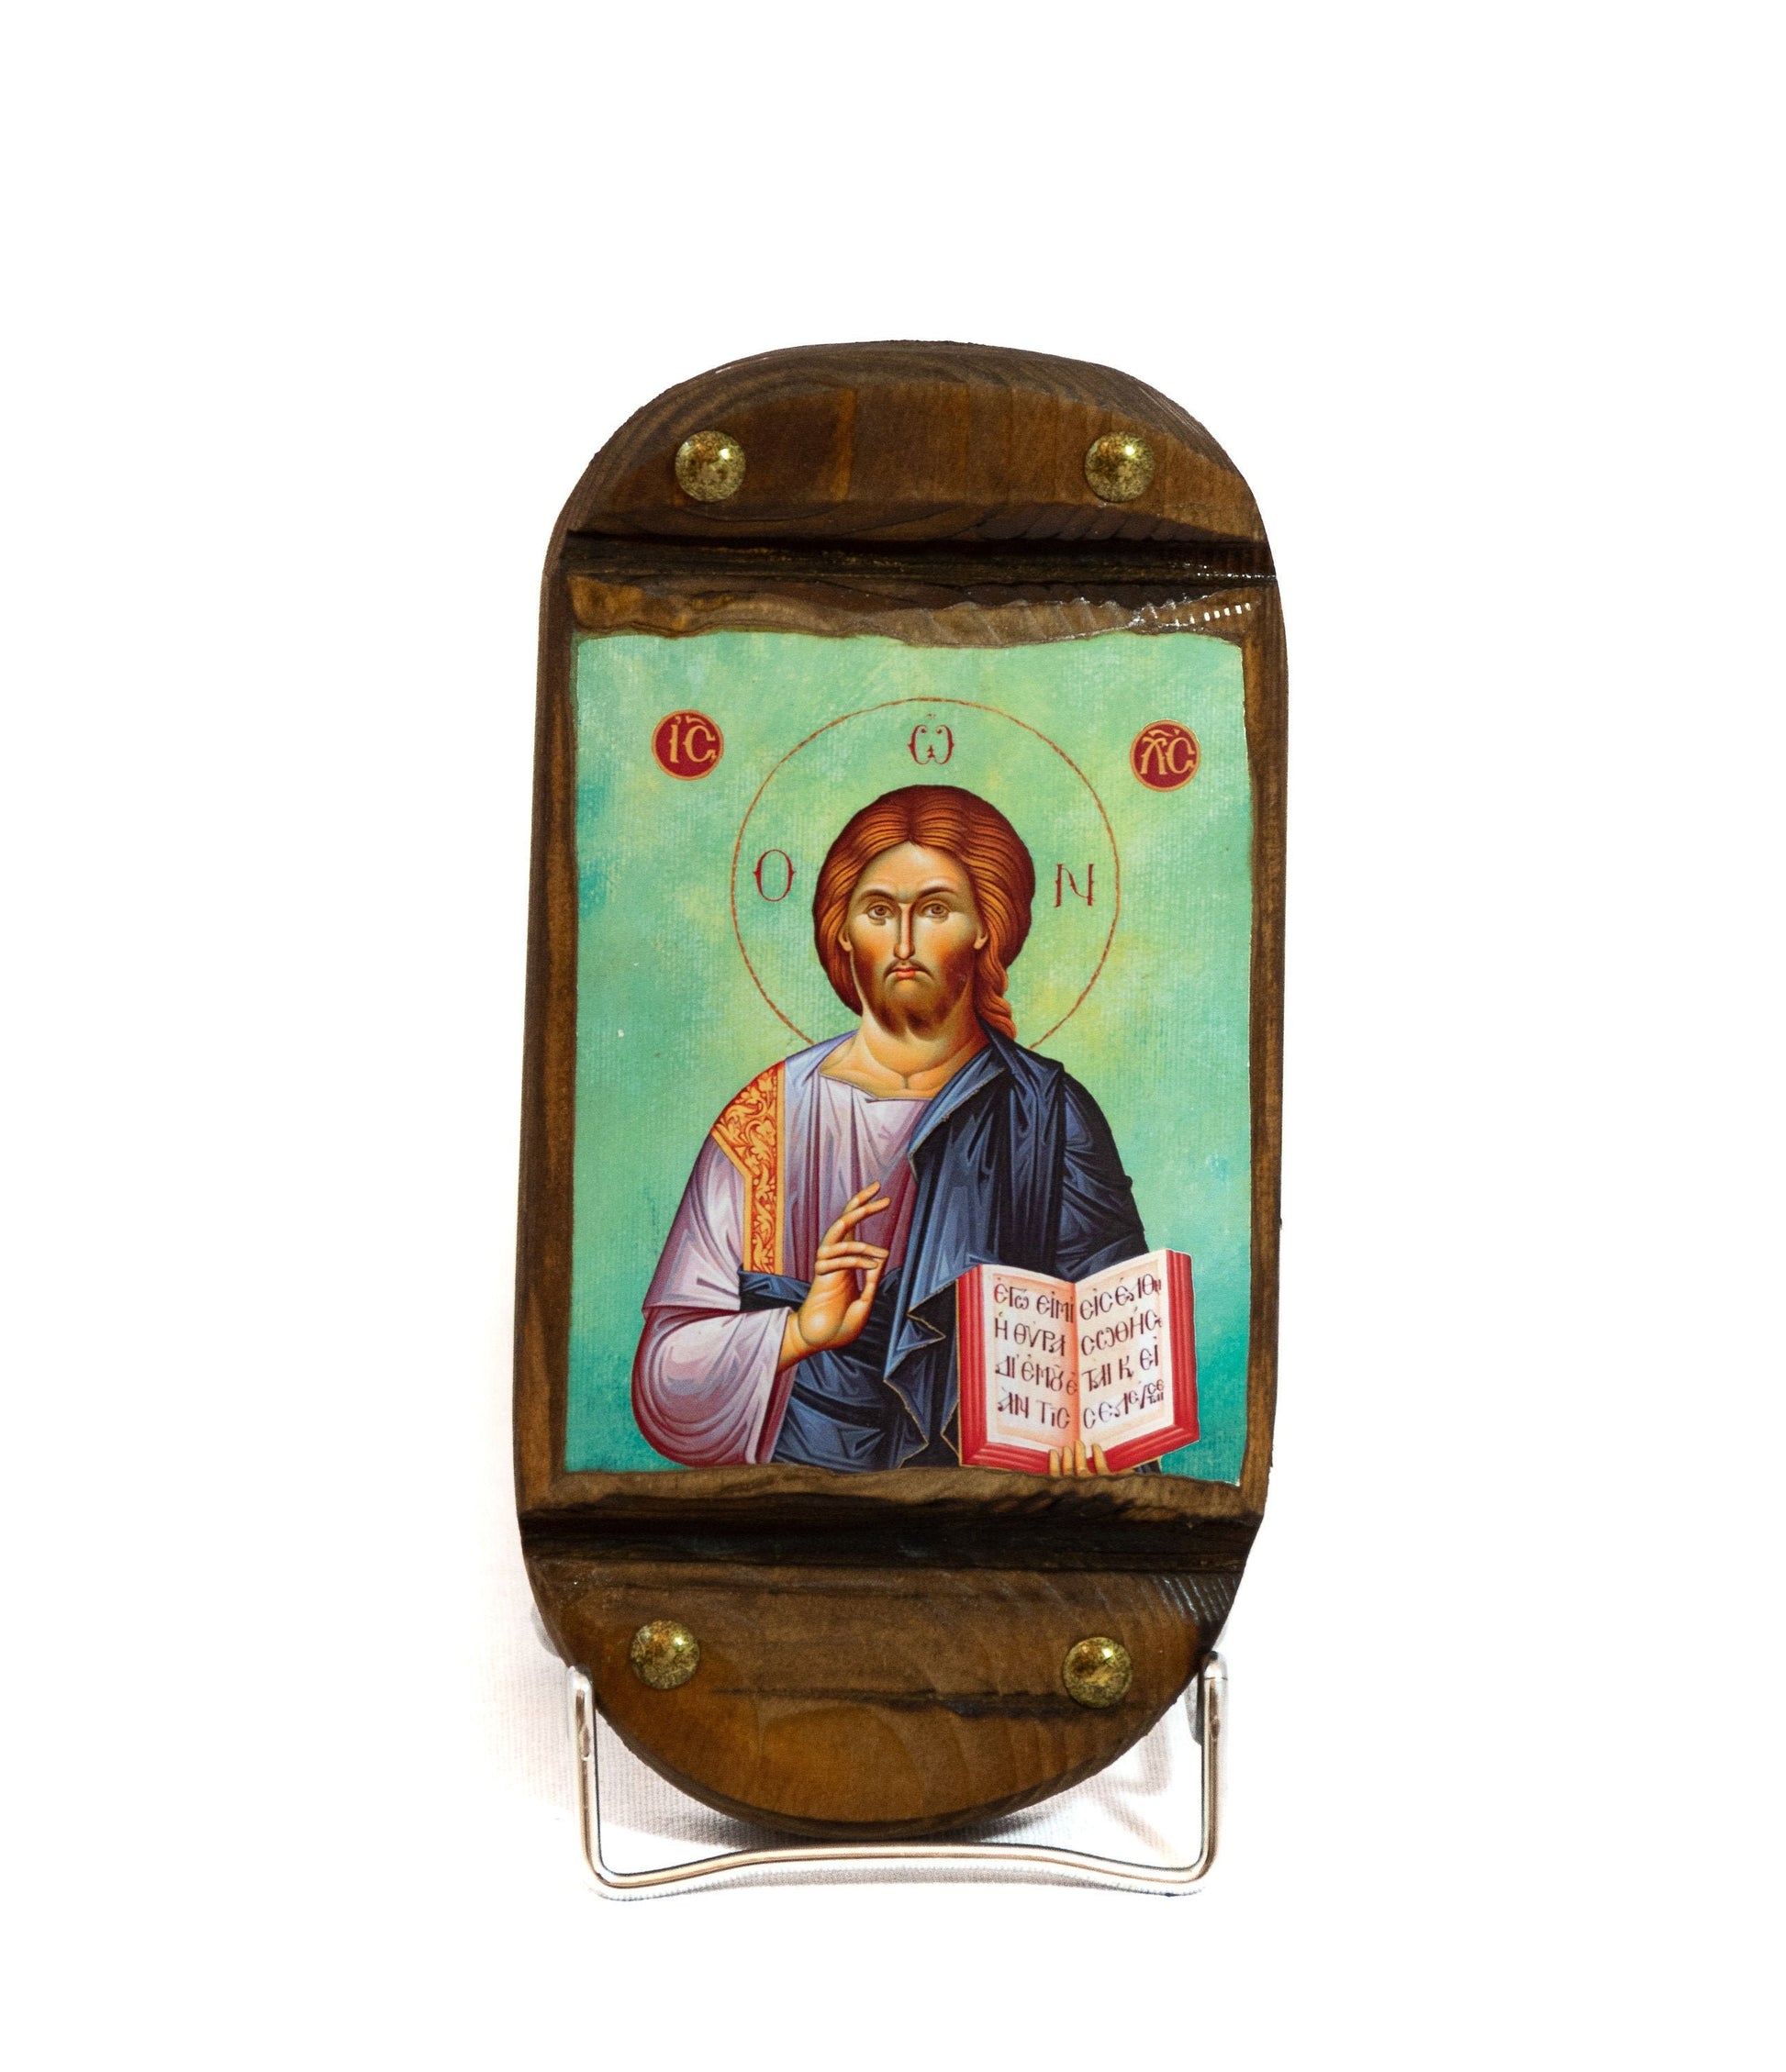 Jesus Christ icon, Handmade Greek Orthodox icon, Byzantine art wall hanging icon of our Lord on wood plaque 20x9cm , wedding gift ideas TheHolyArt